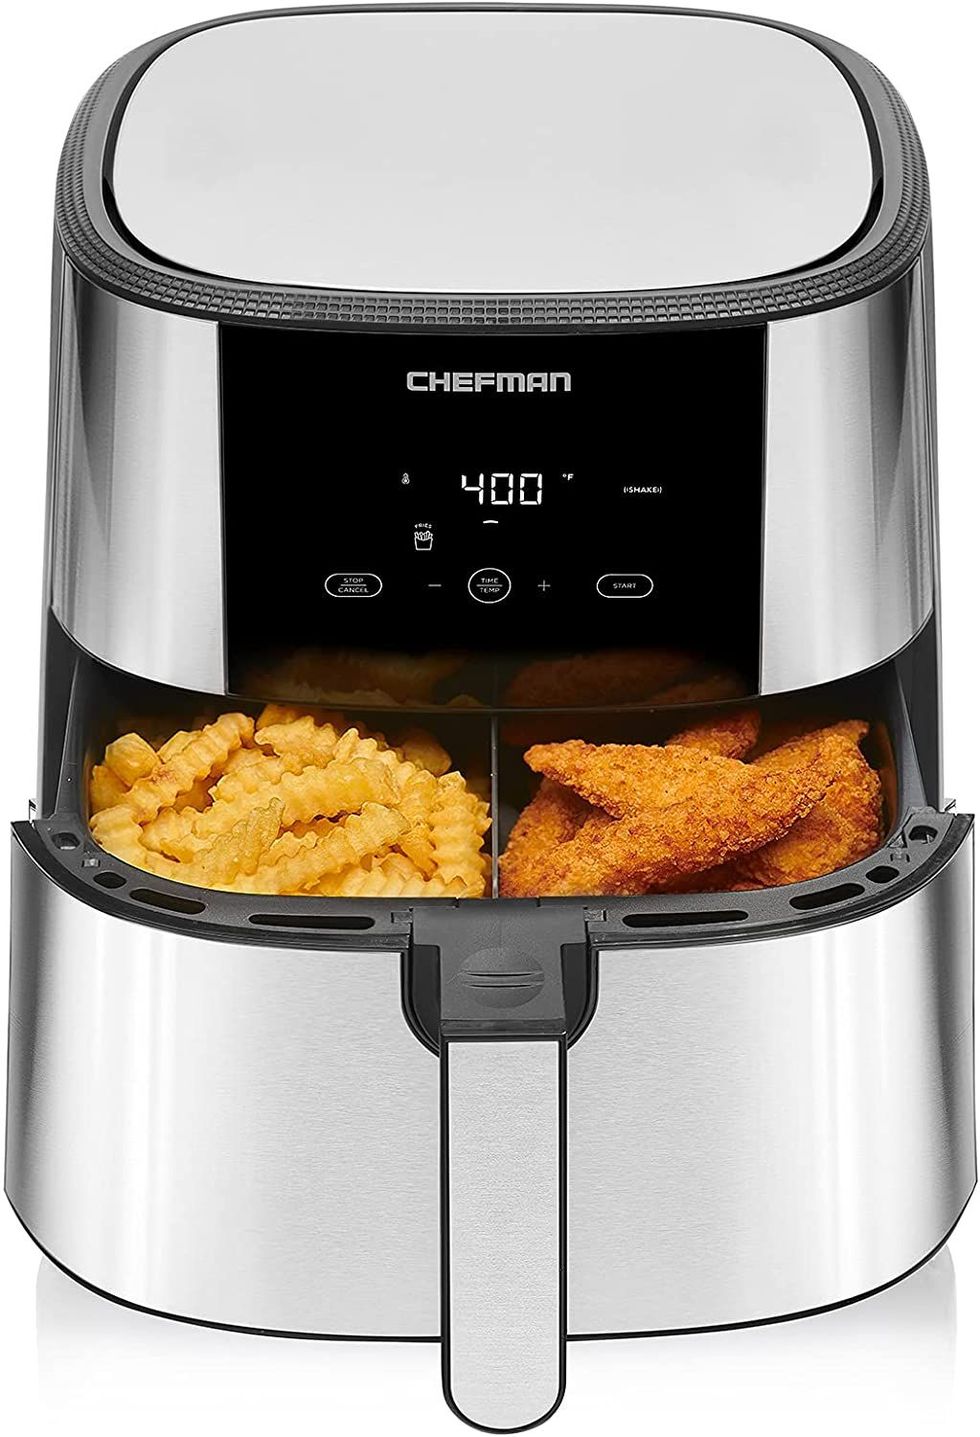 10 smart kitchen gadgets that will help you bake the tastiest treats -  Reviewed